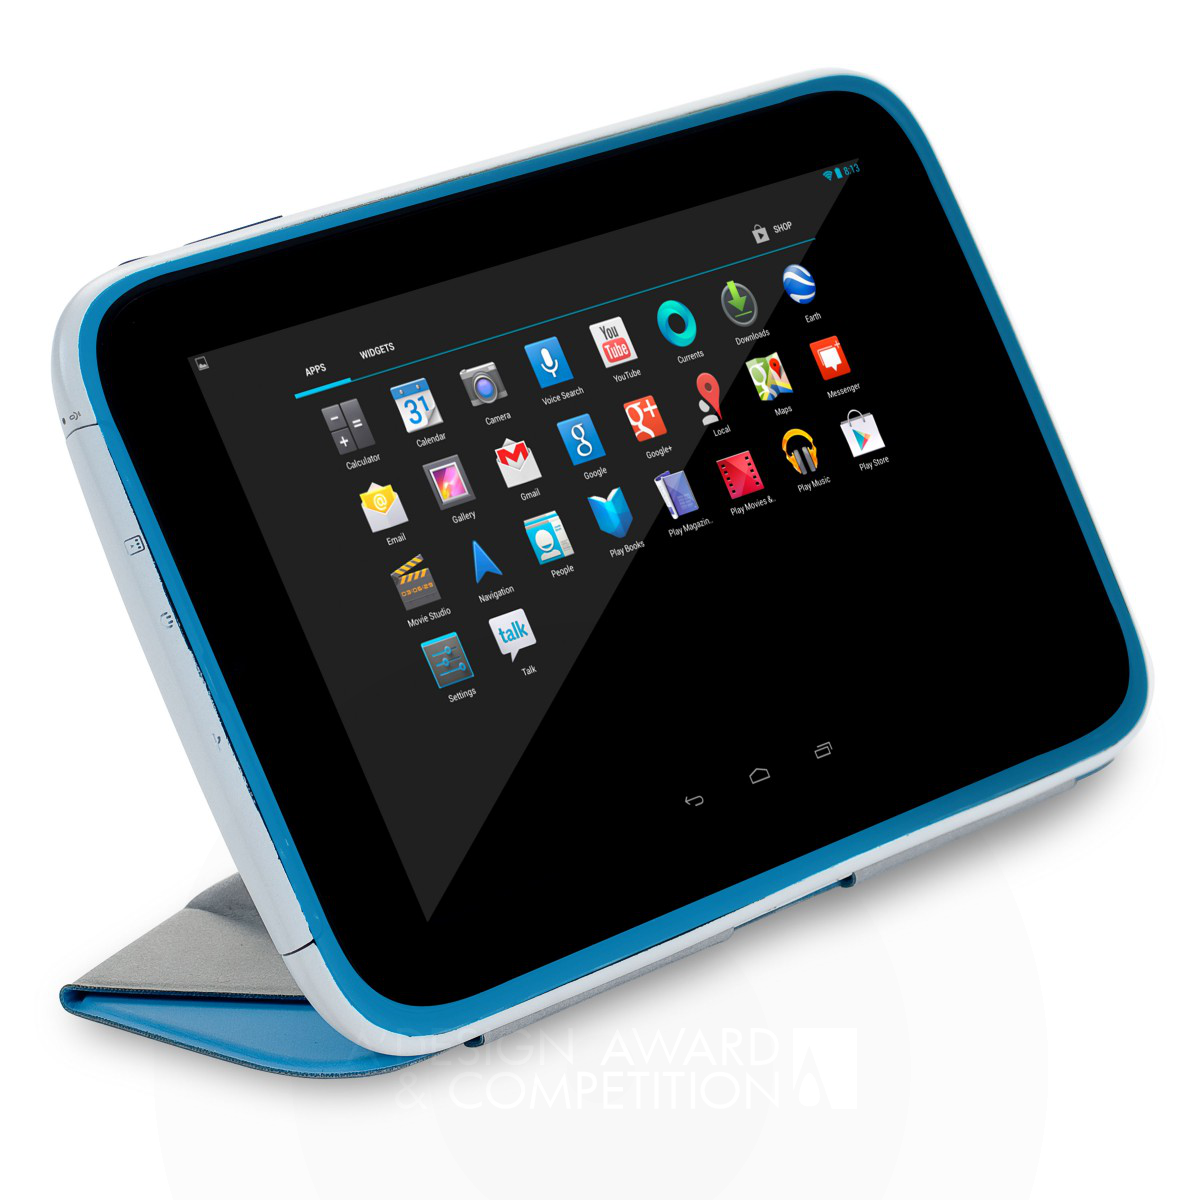 ANY 202 Tablet for K-12 Education